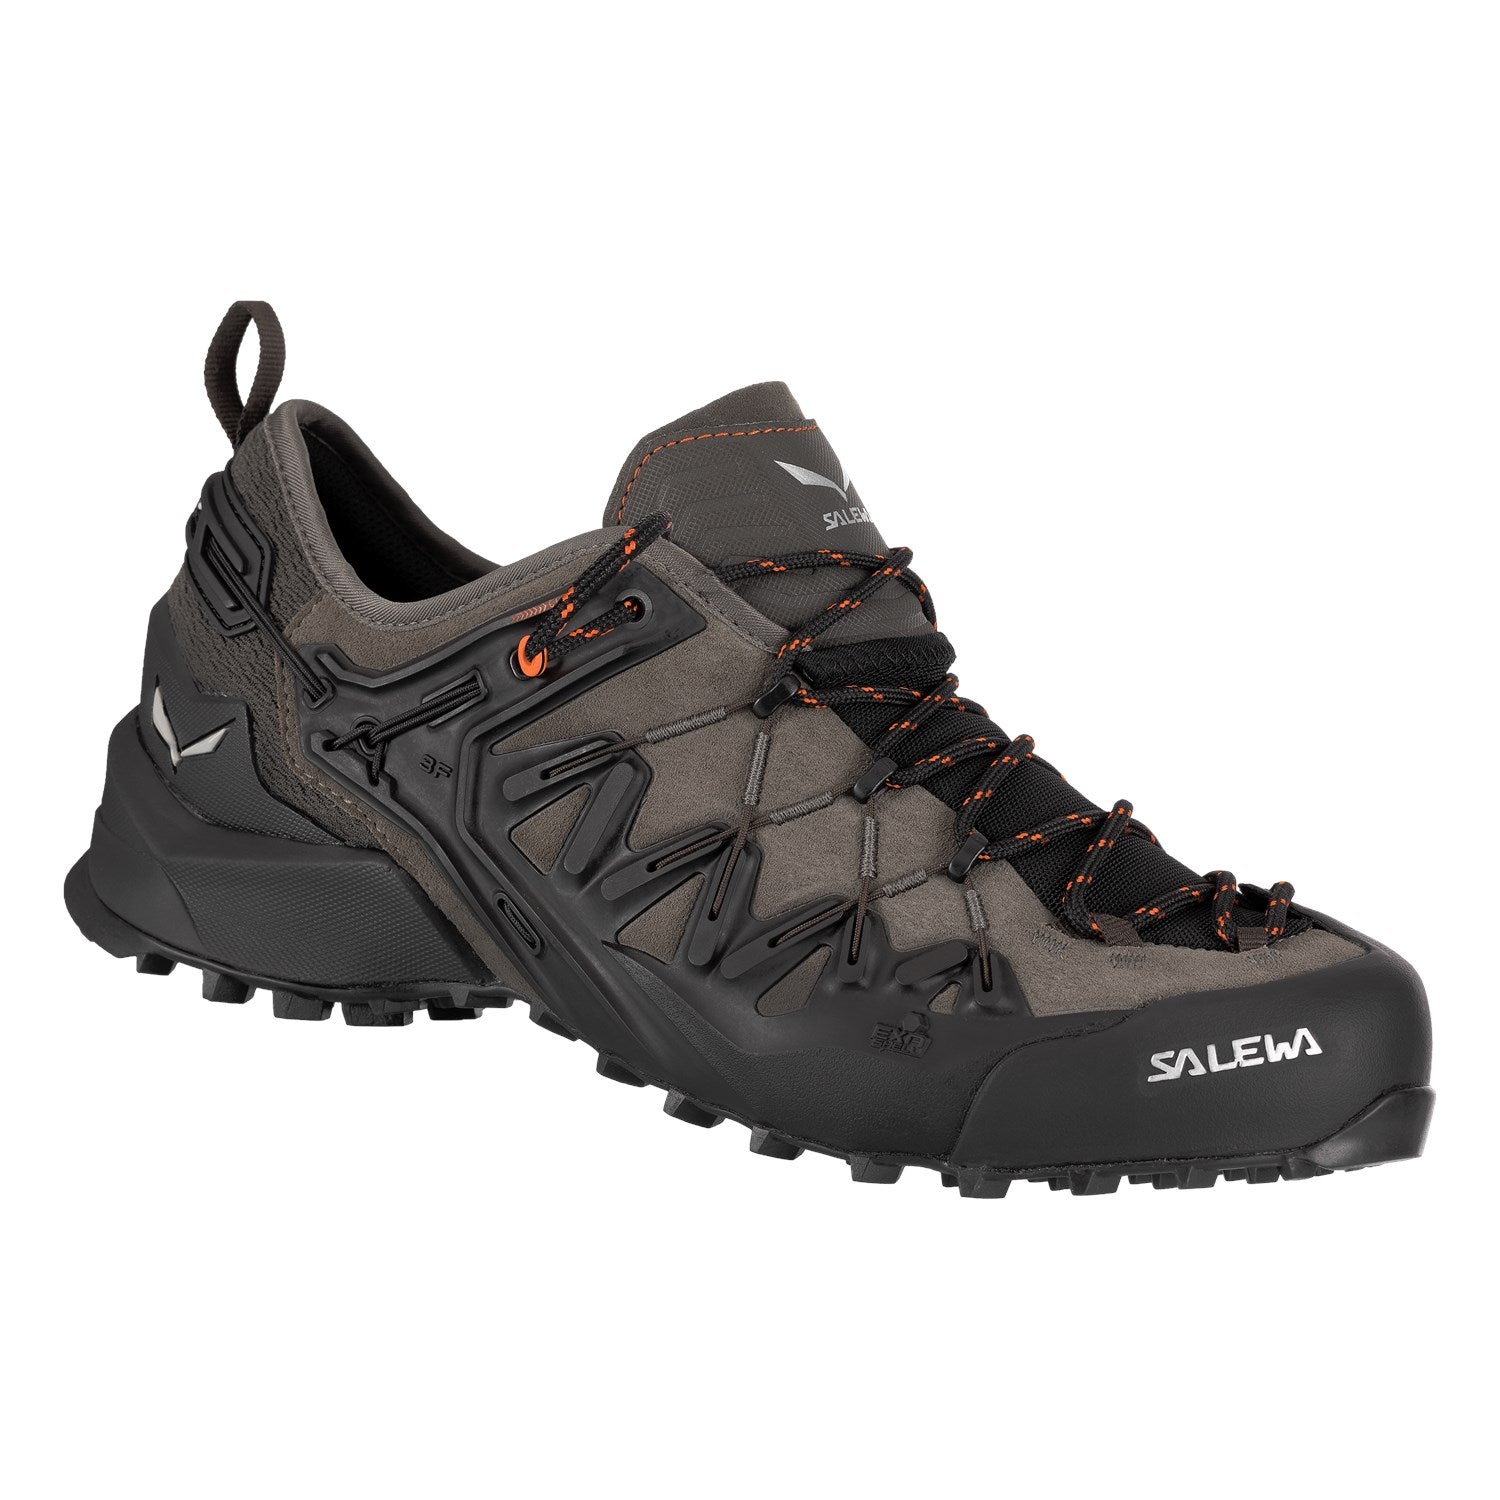 Salewa Men's Wildfire Edge Approach Shoes